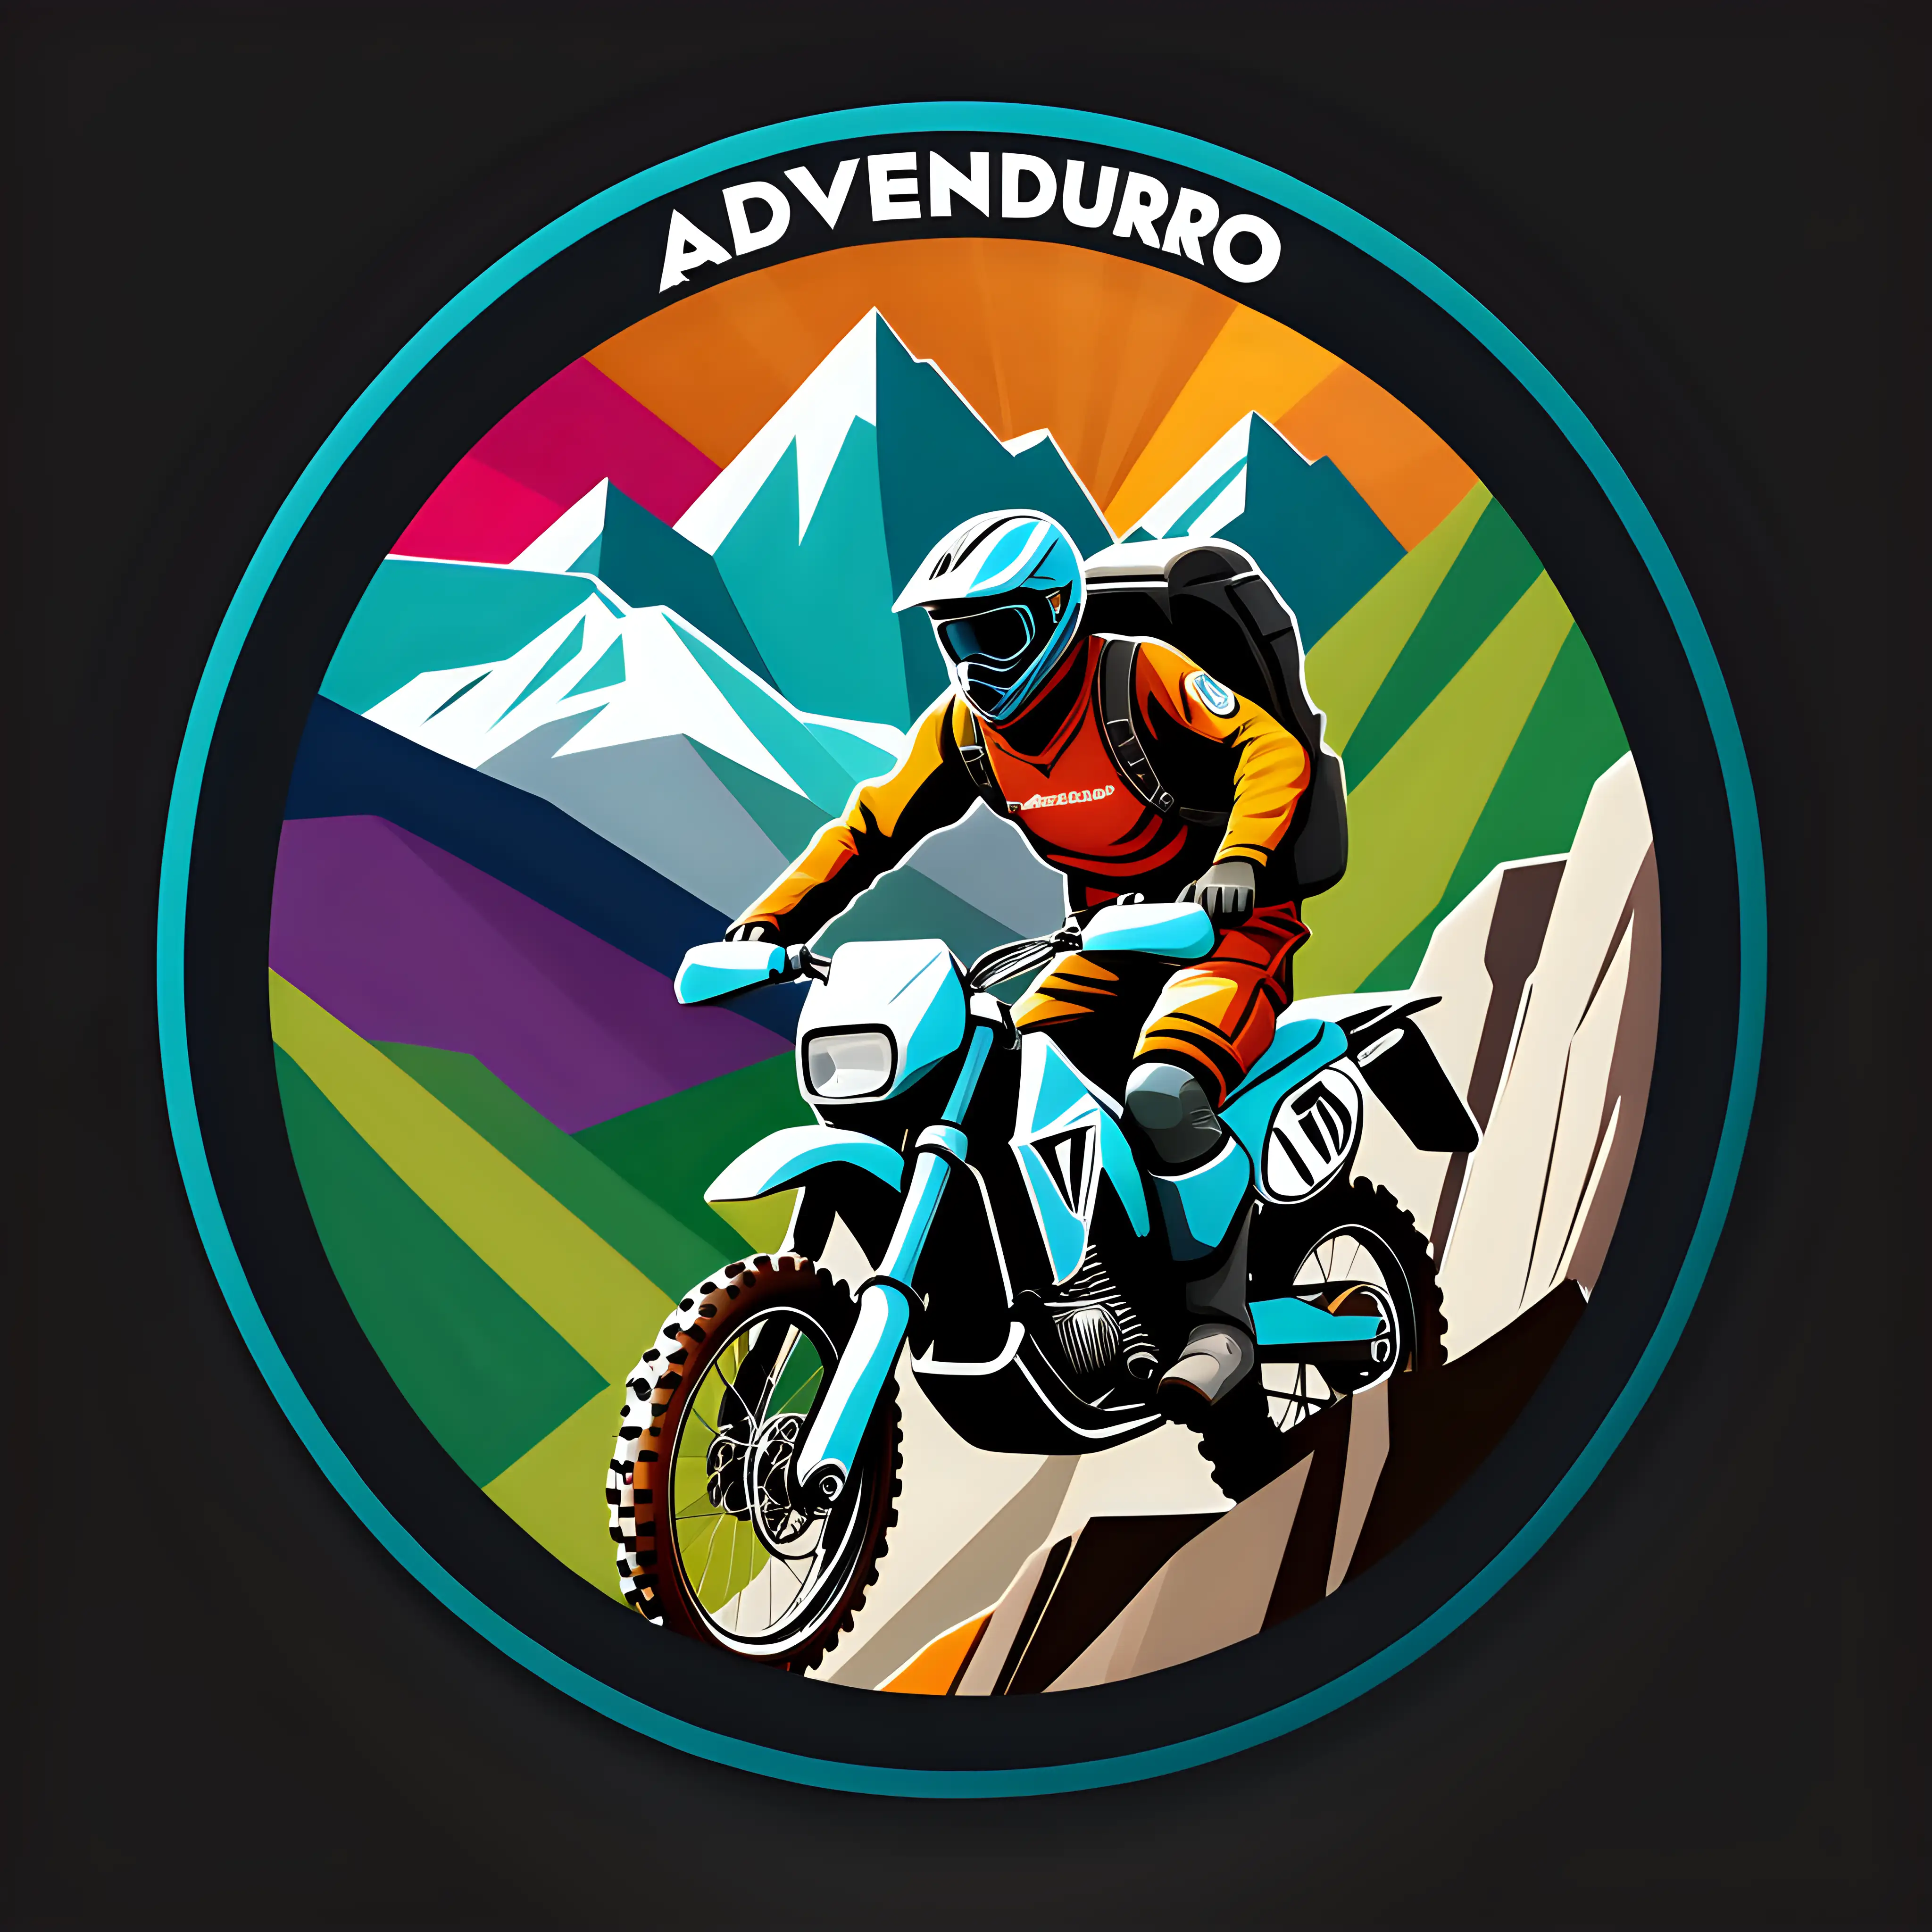 Thrilling ADVENDURO Rally Mountain Ascent with Rider